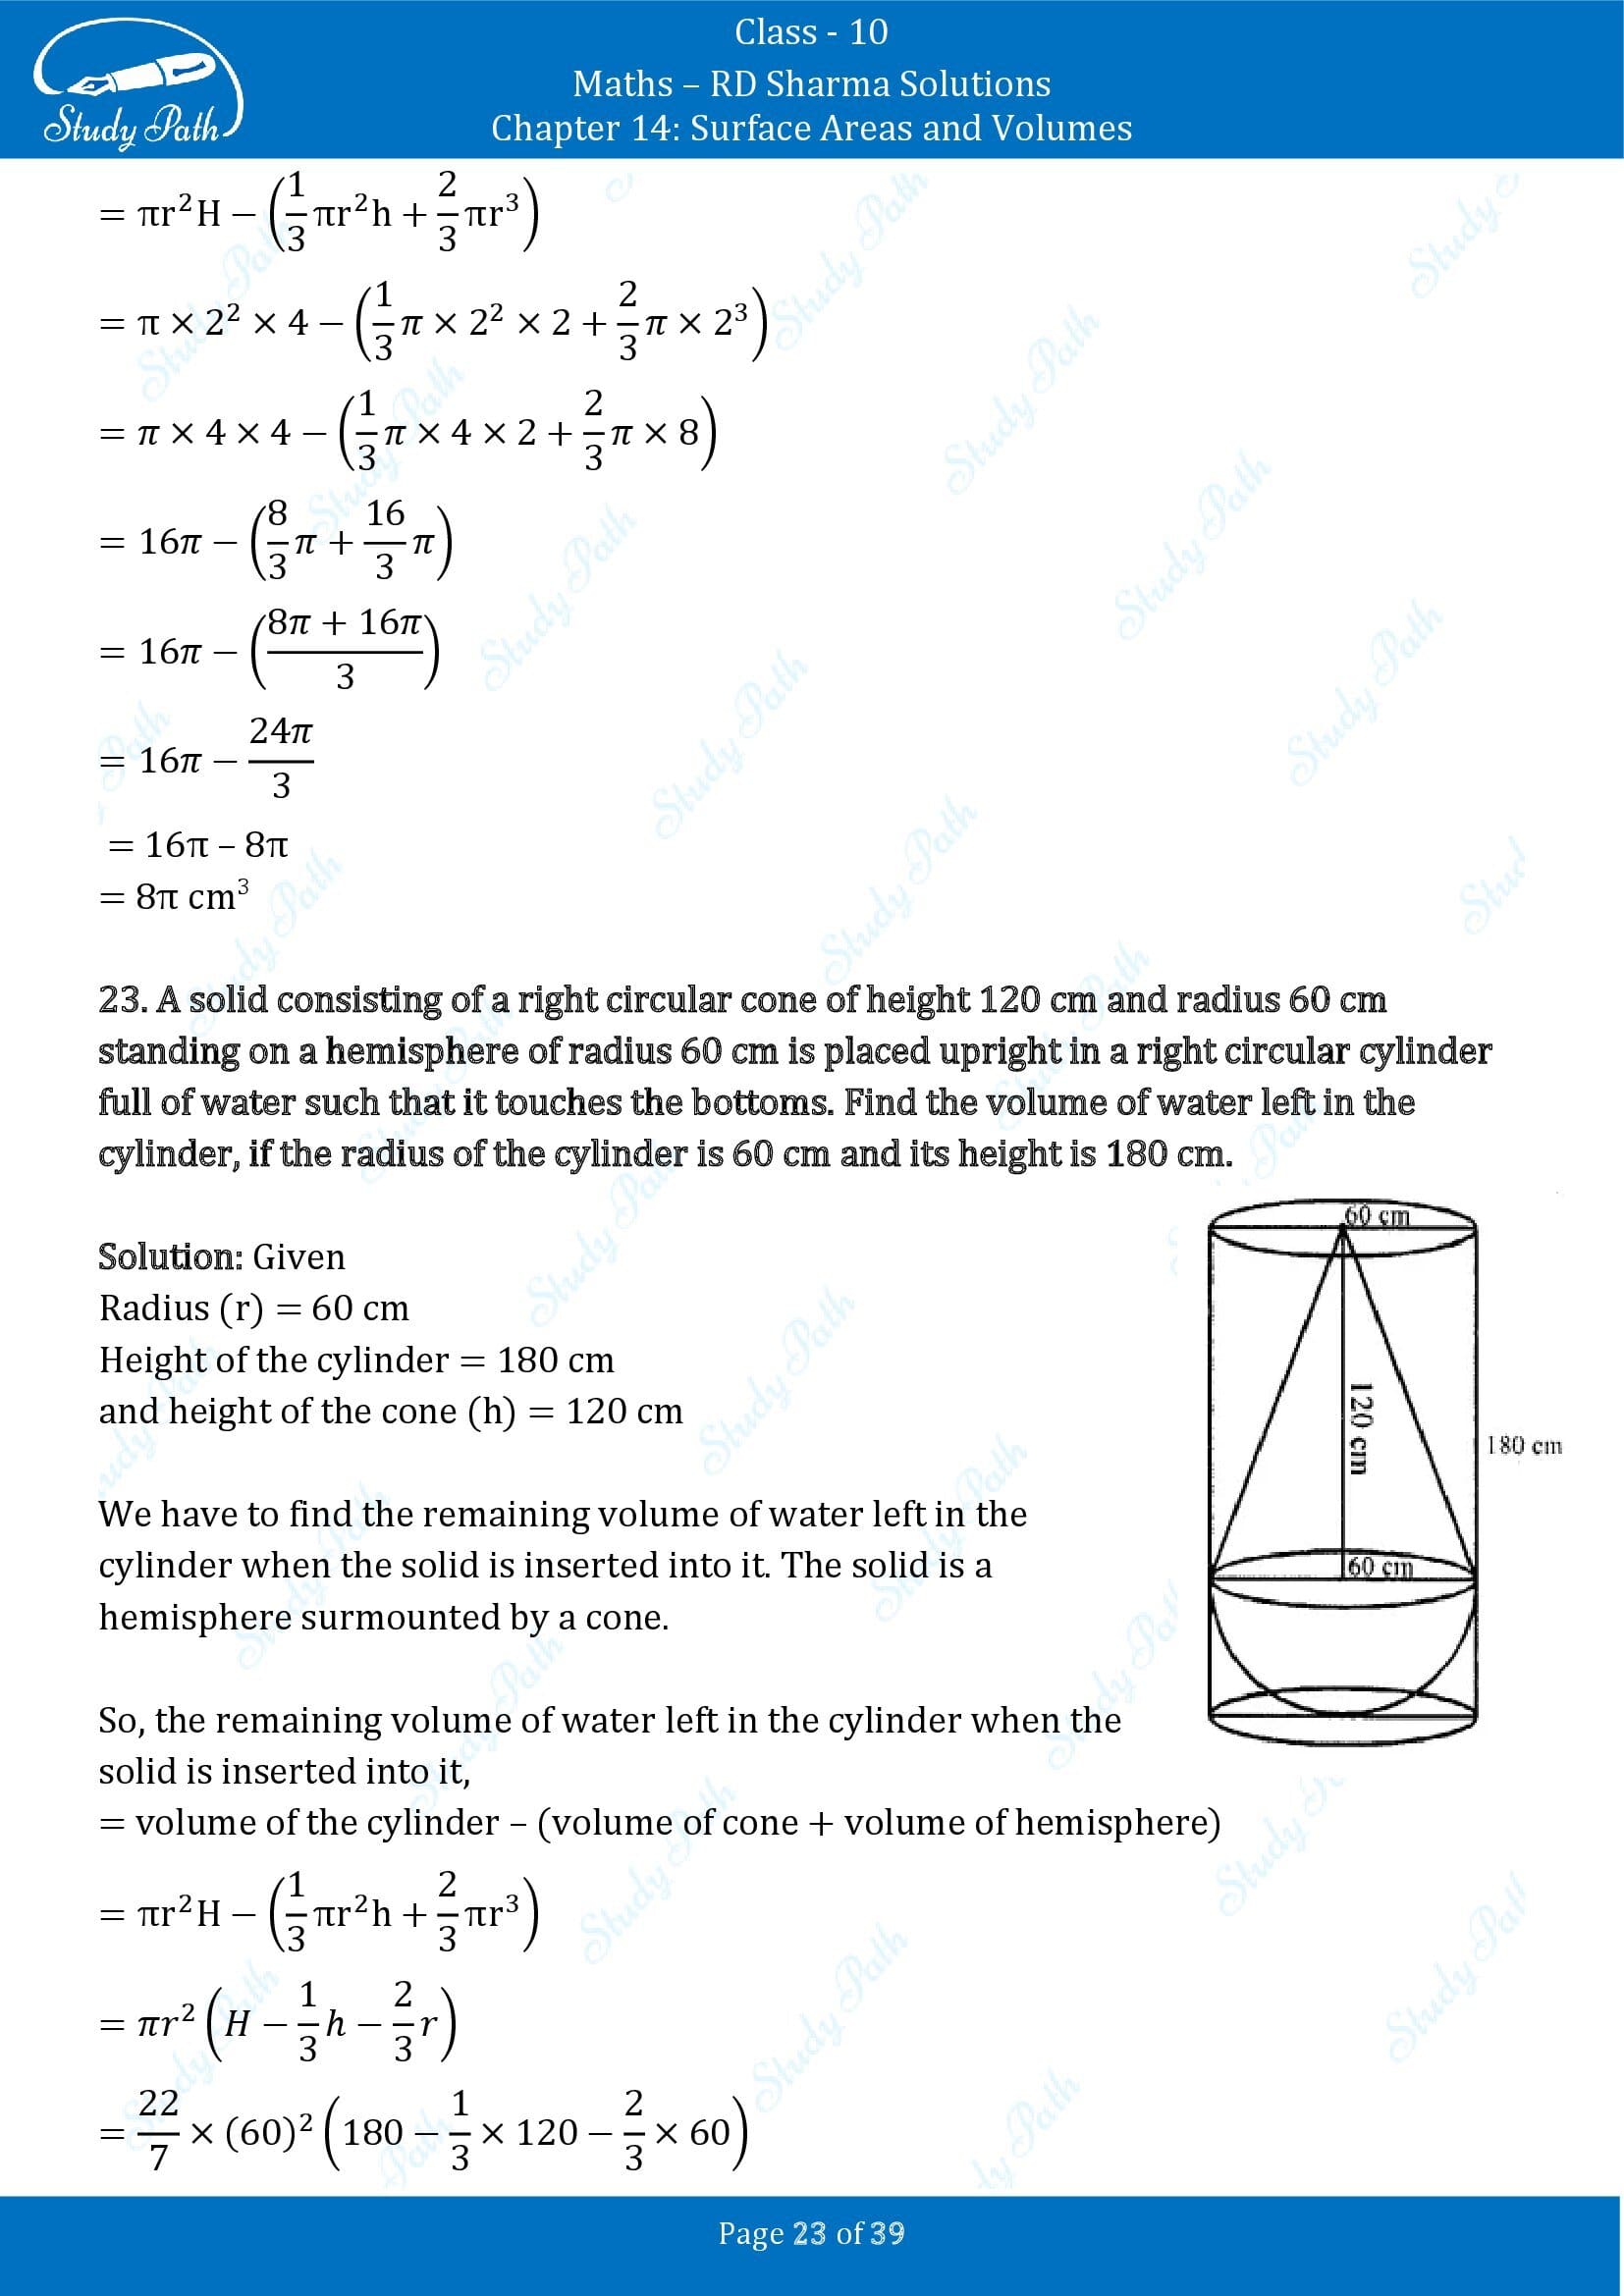 RD Sharma Solutions Class 10 Chapter 14 Surface Areas and Volumes Exercise 14.2 00023